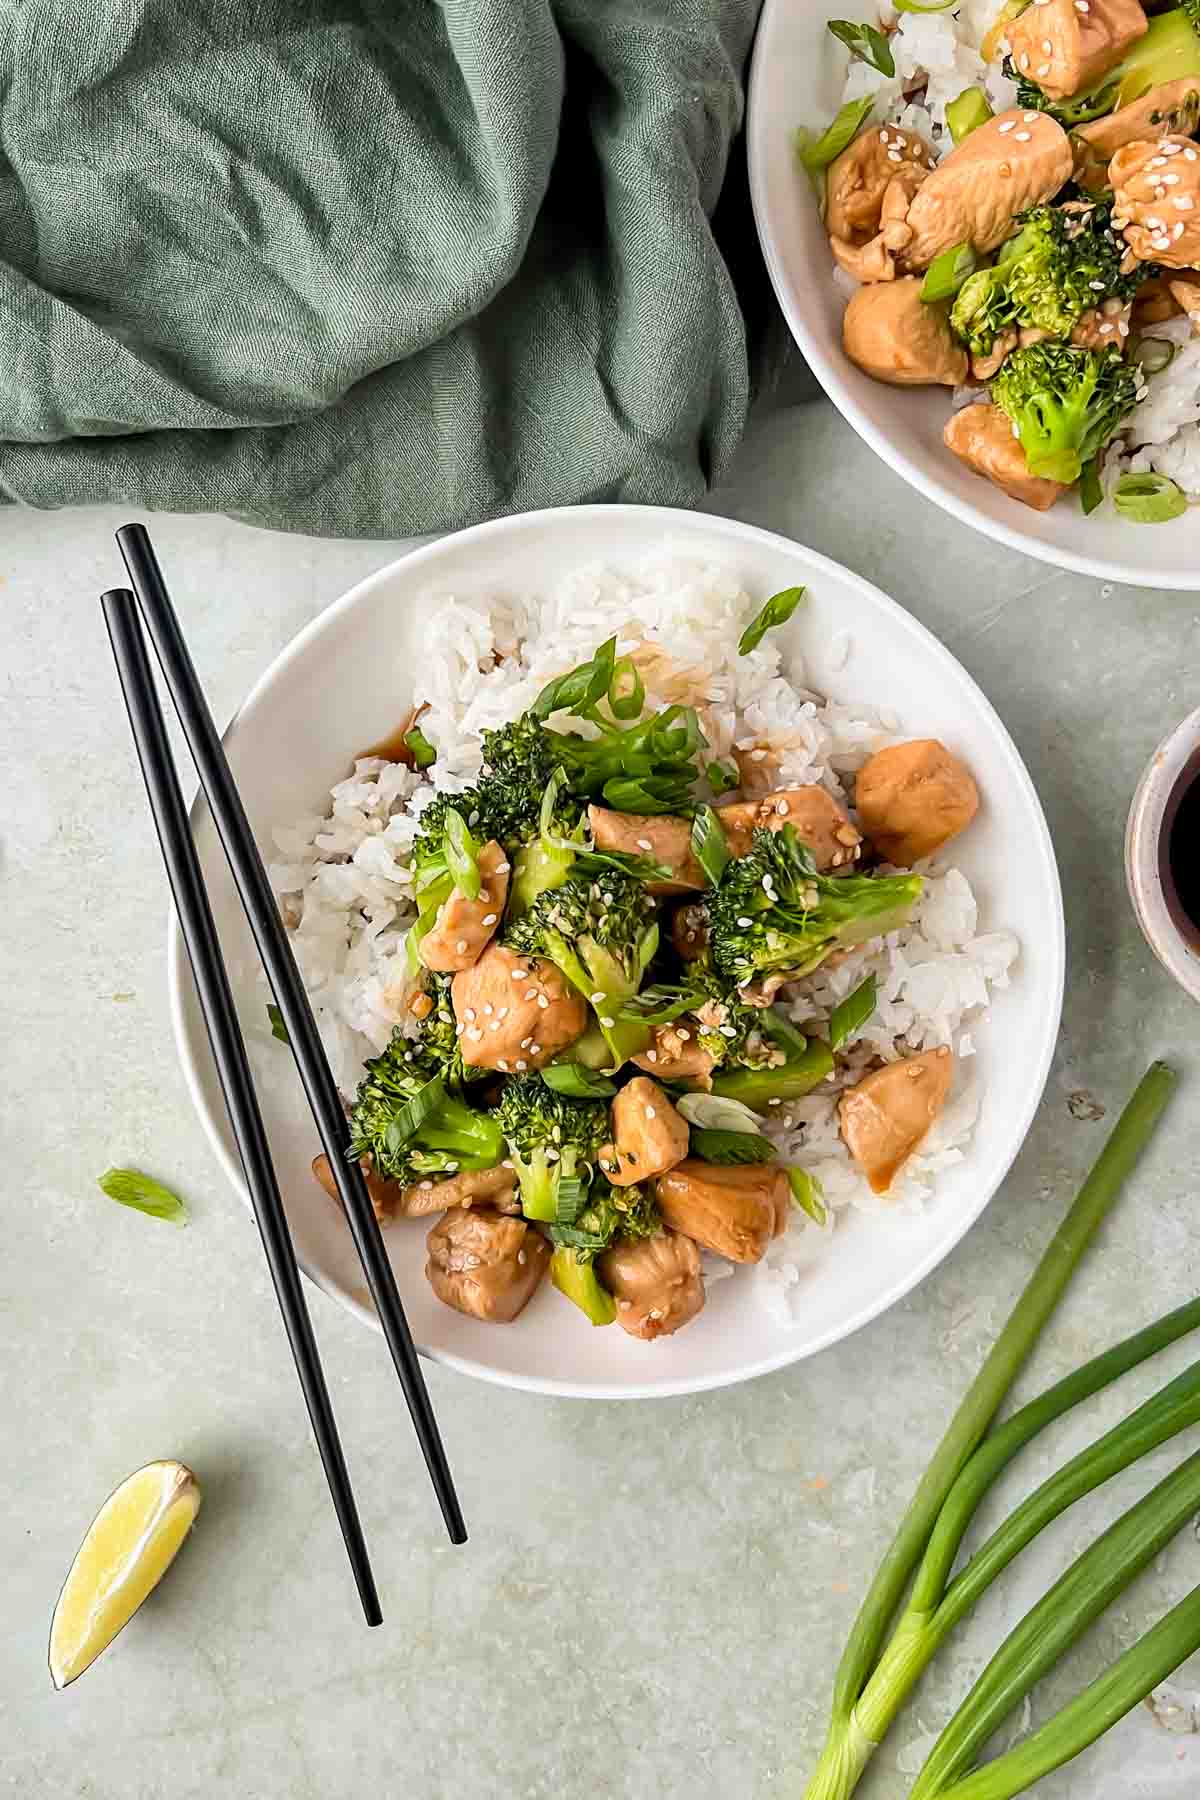 teriyaki chicken and broccoli served over white rice in white bowl with chopsticks.